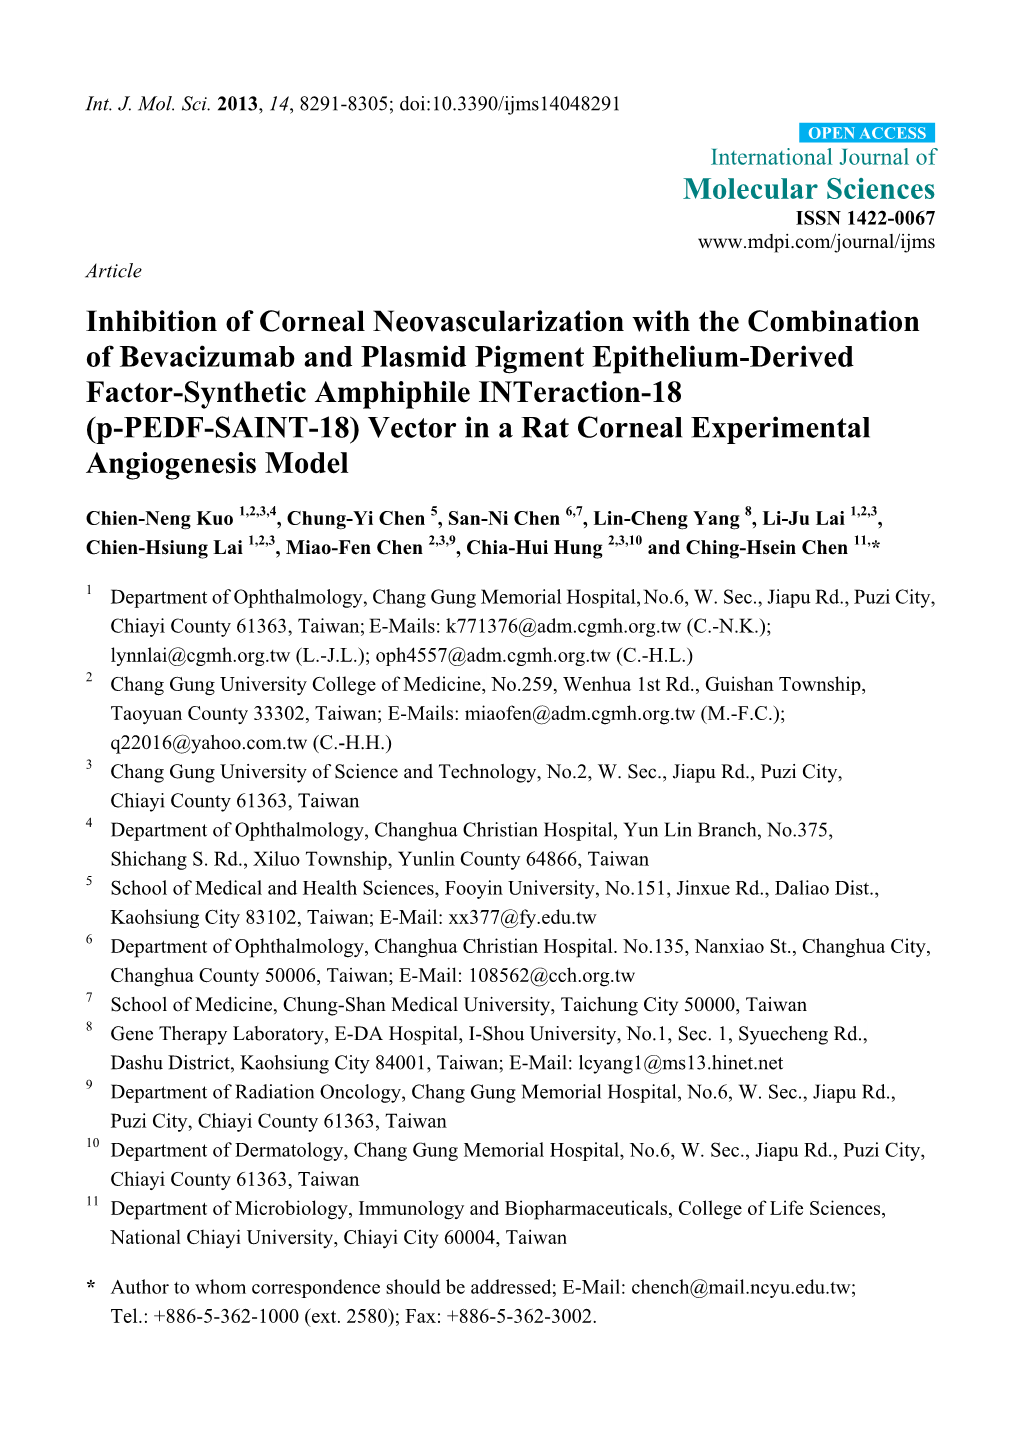 Inhibition of Corneal Neovascularization with The